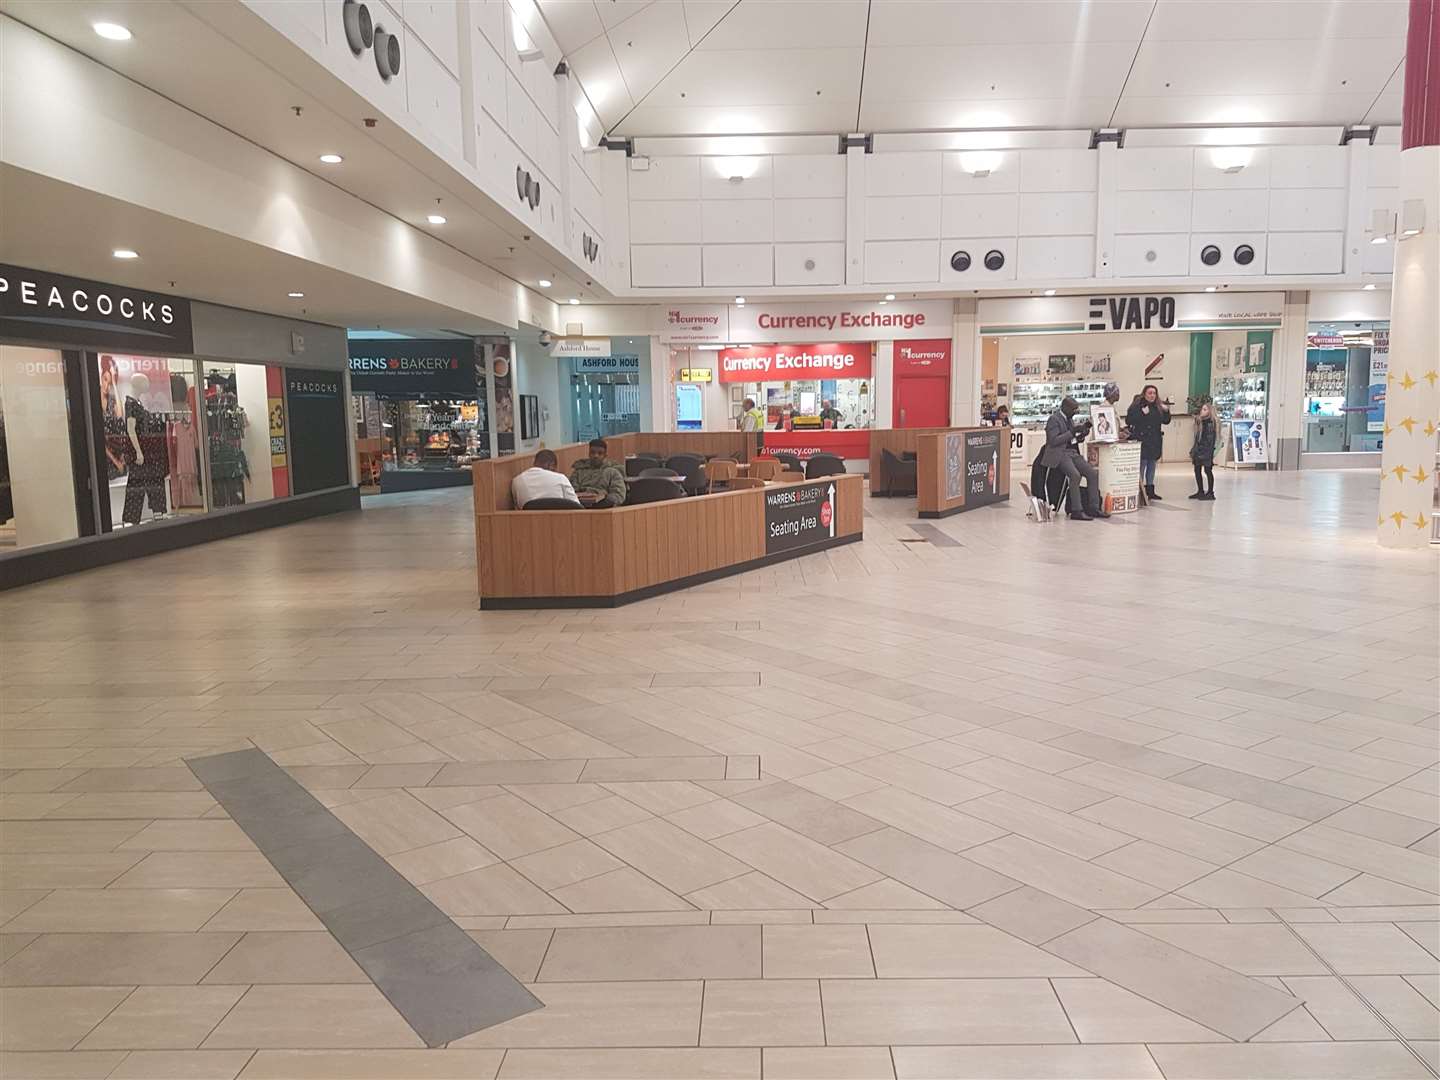 A confrontation is believed to have occurred in this part of County Square Shopping Centre